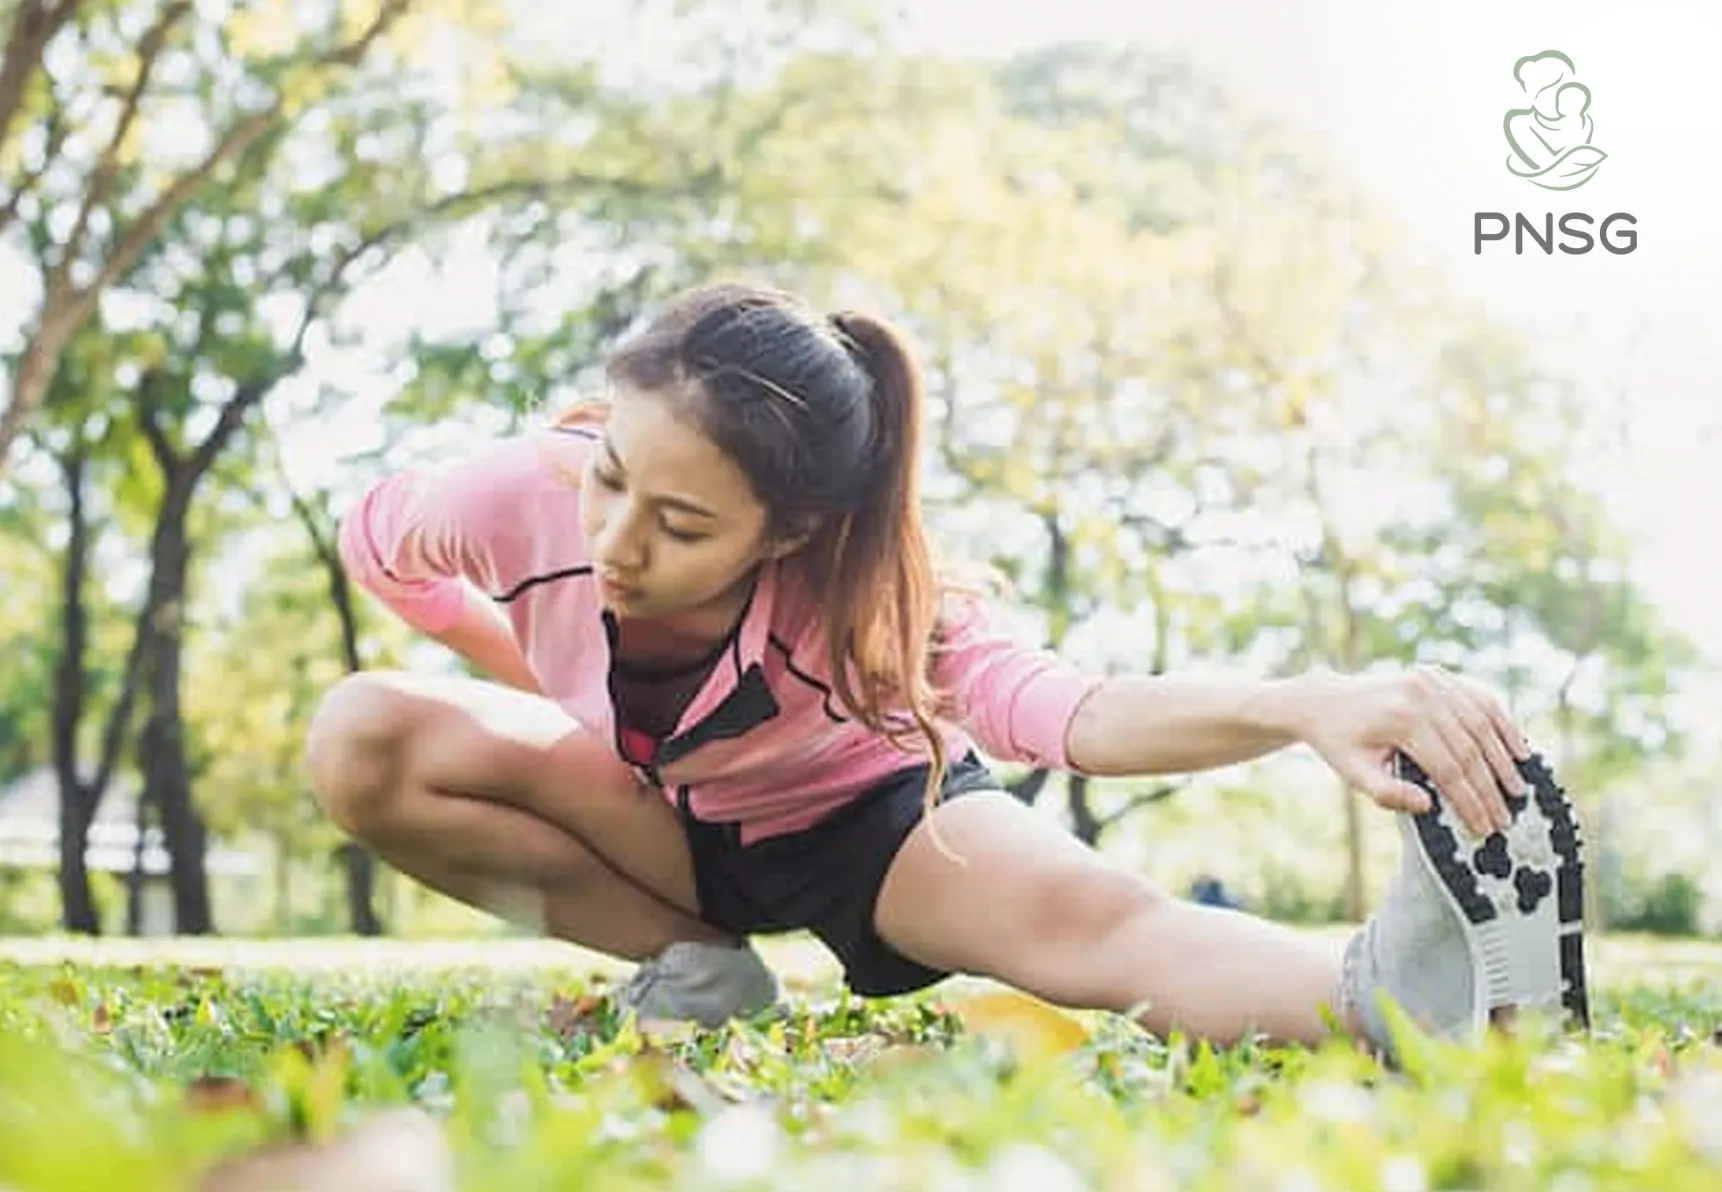 How To Keep Fit During And After Pregnancy - PNSG Singapore